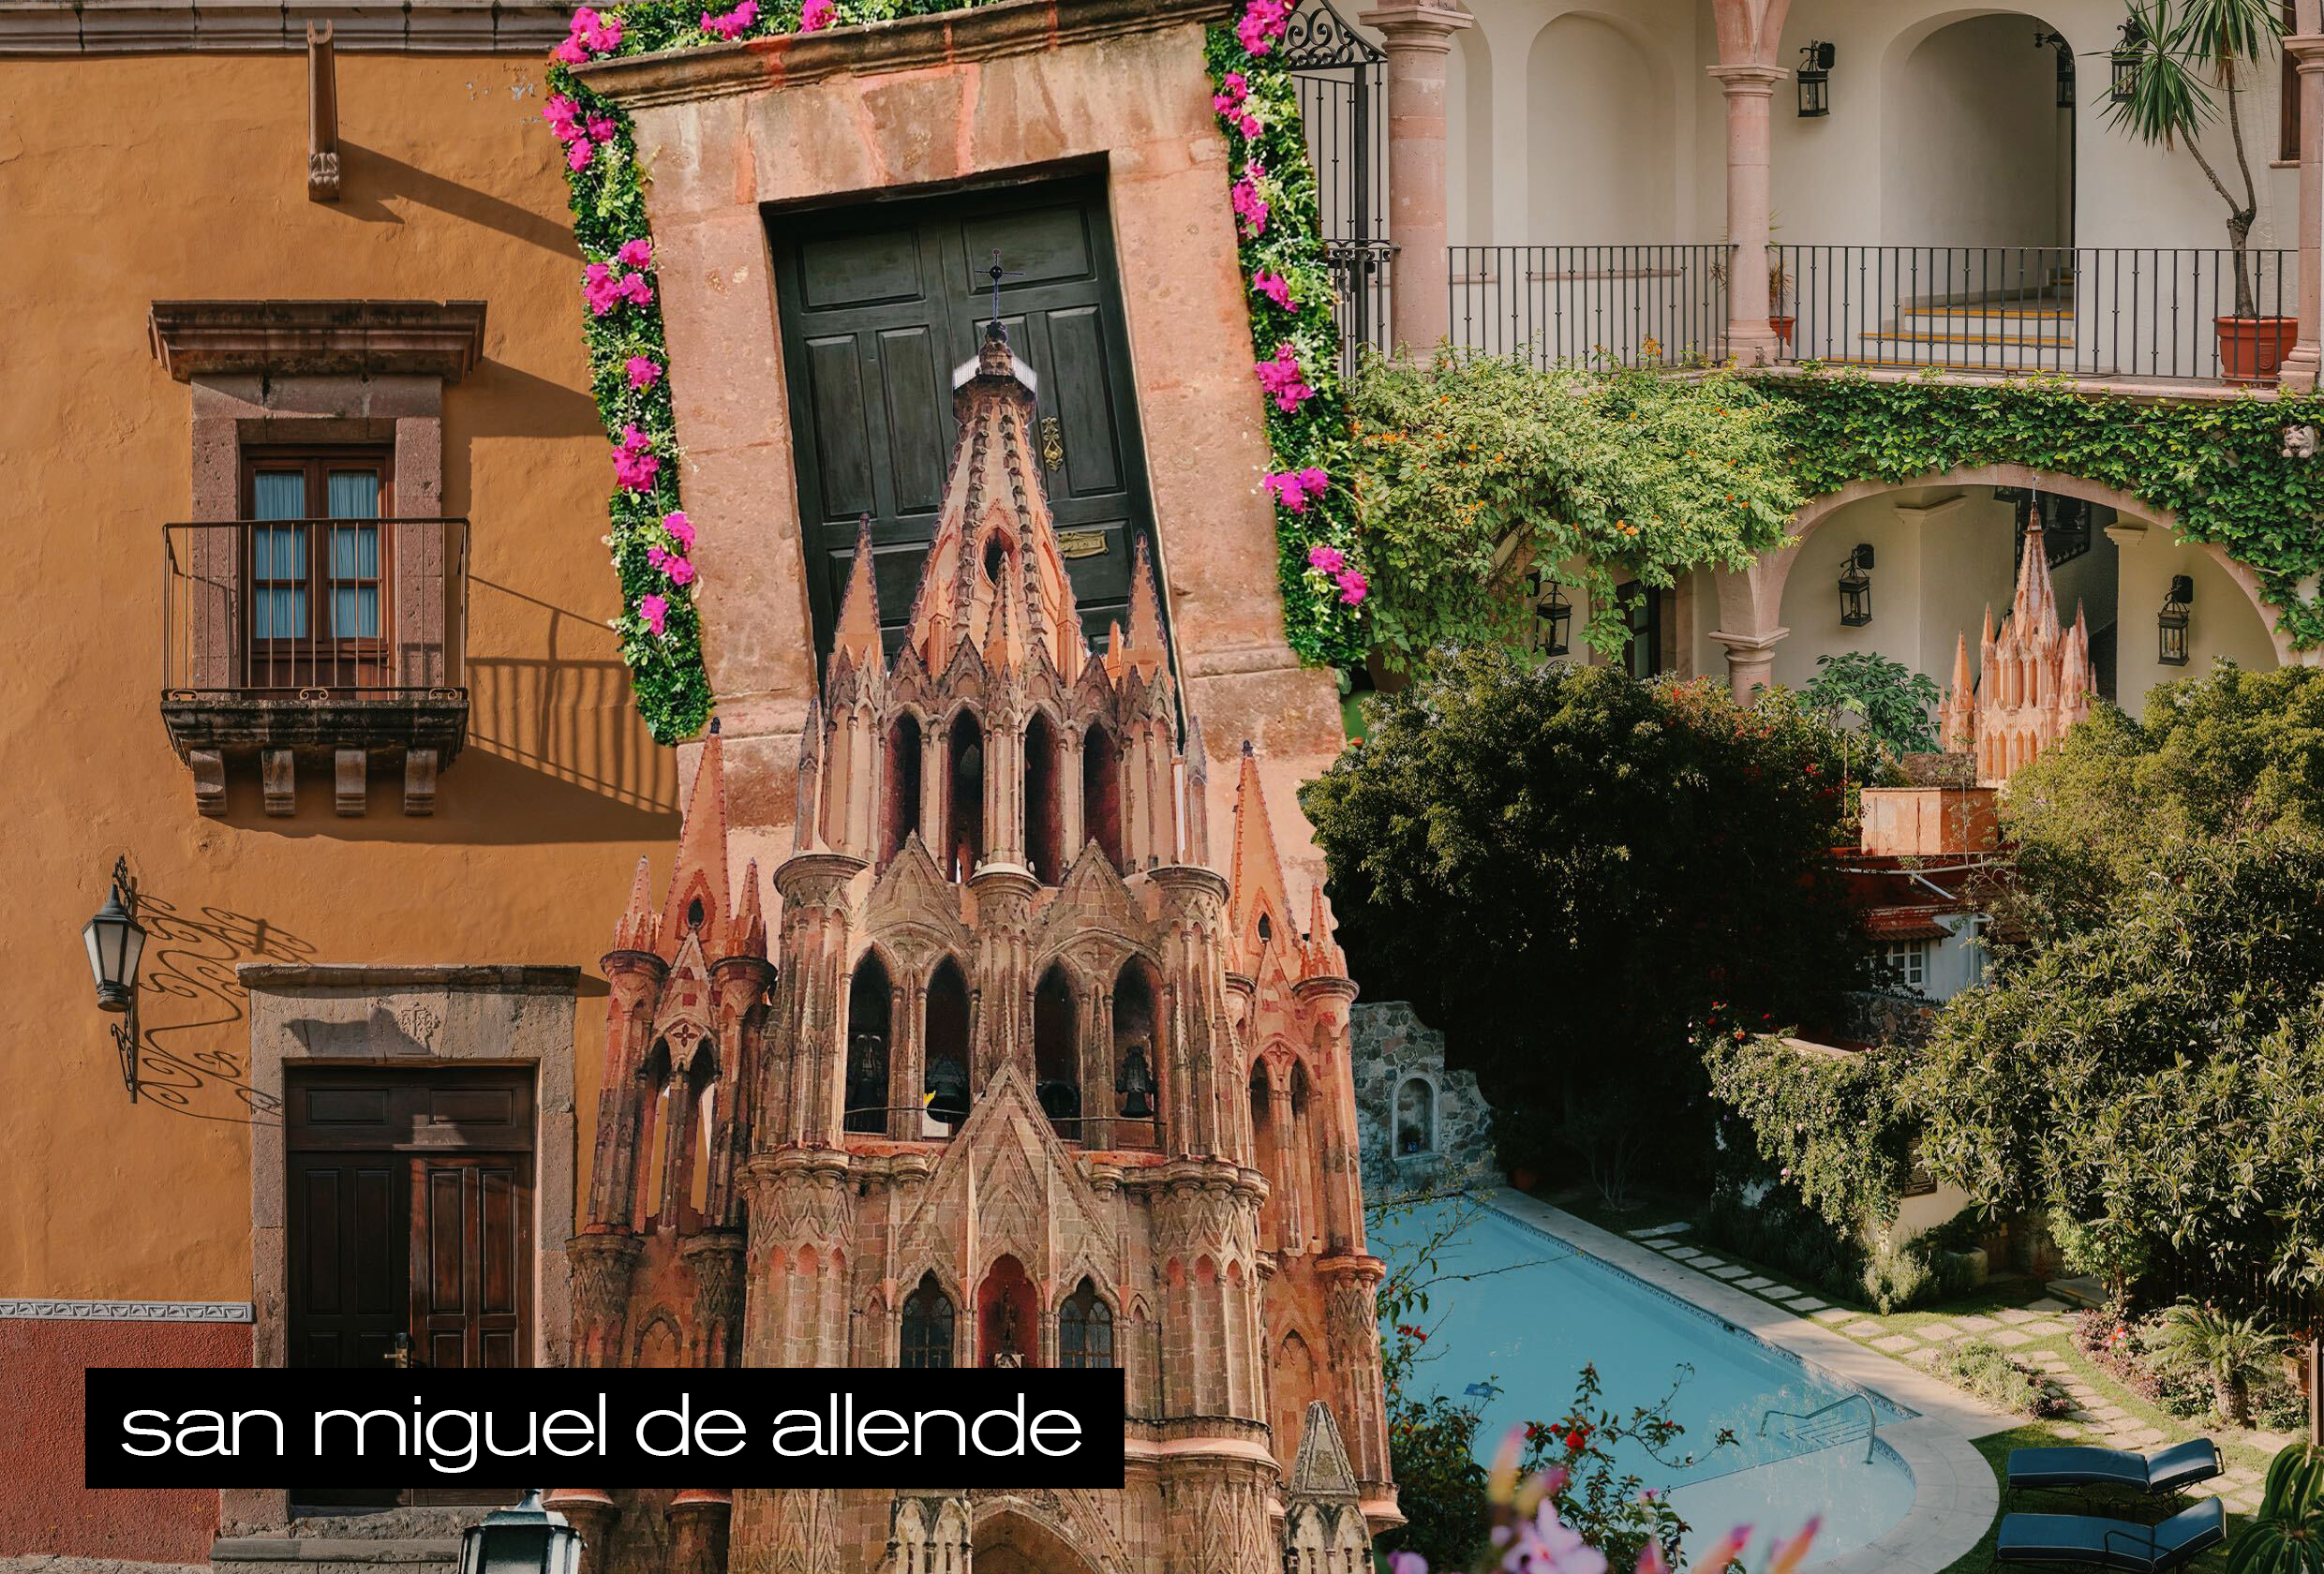 A collage of images featuring San Miguel de Allende, Mexico.